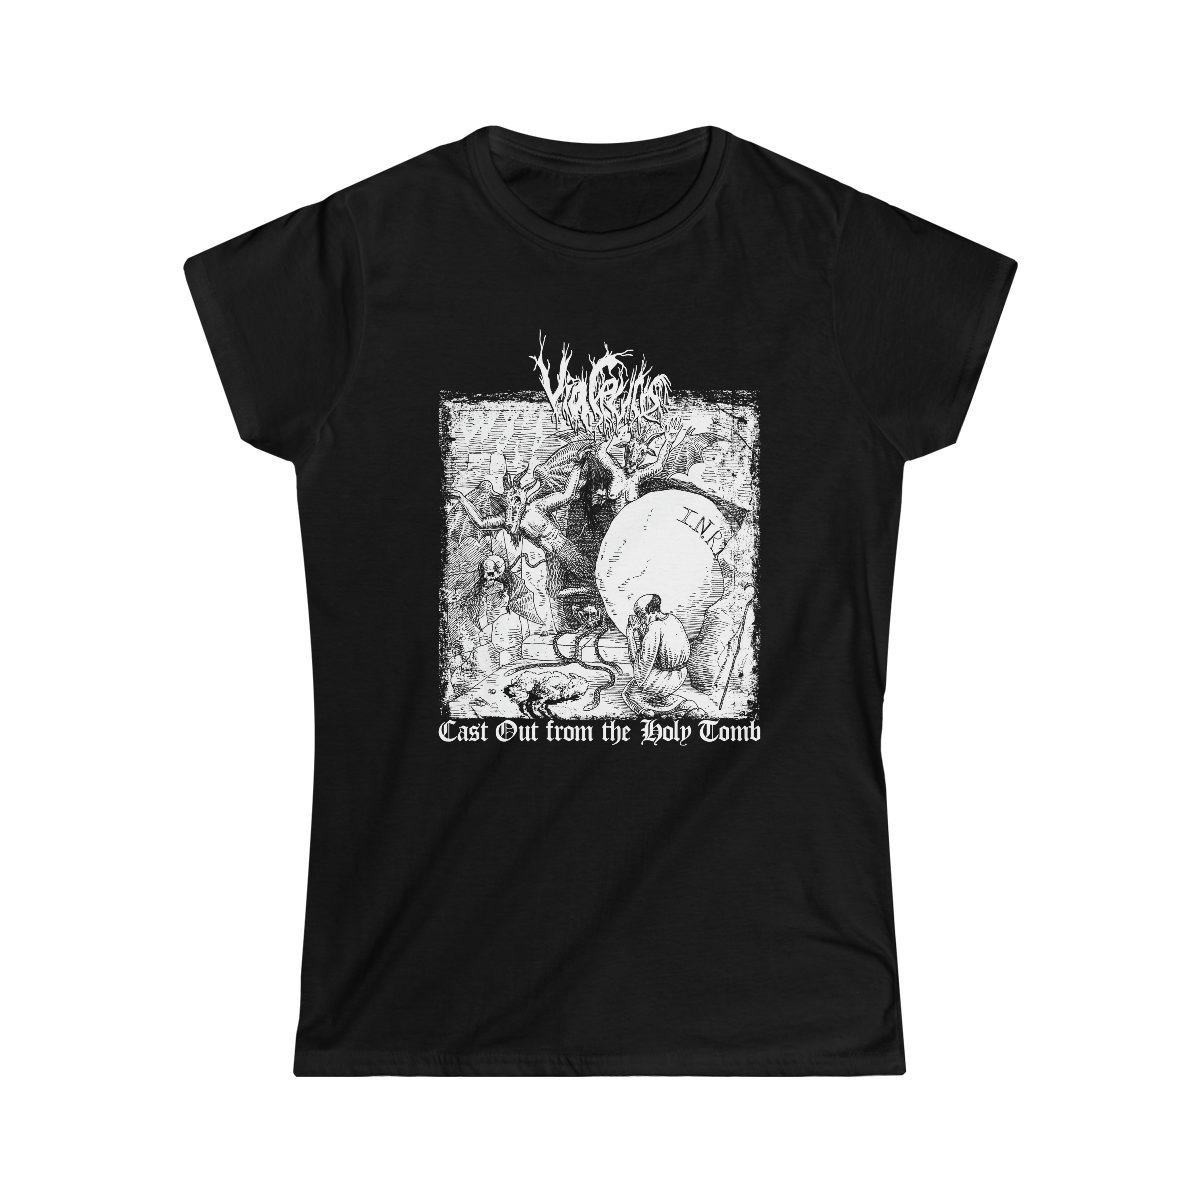 Via Crucis – Cast Out from the Holy Tomb Women’s Short Sleeve Tshirt 64000L